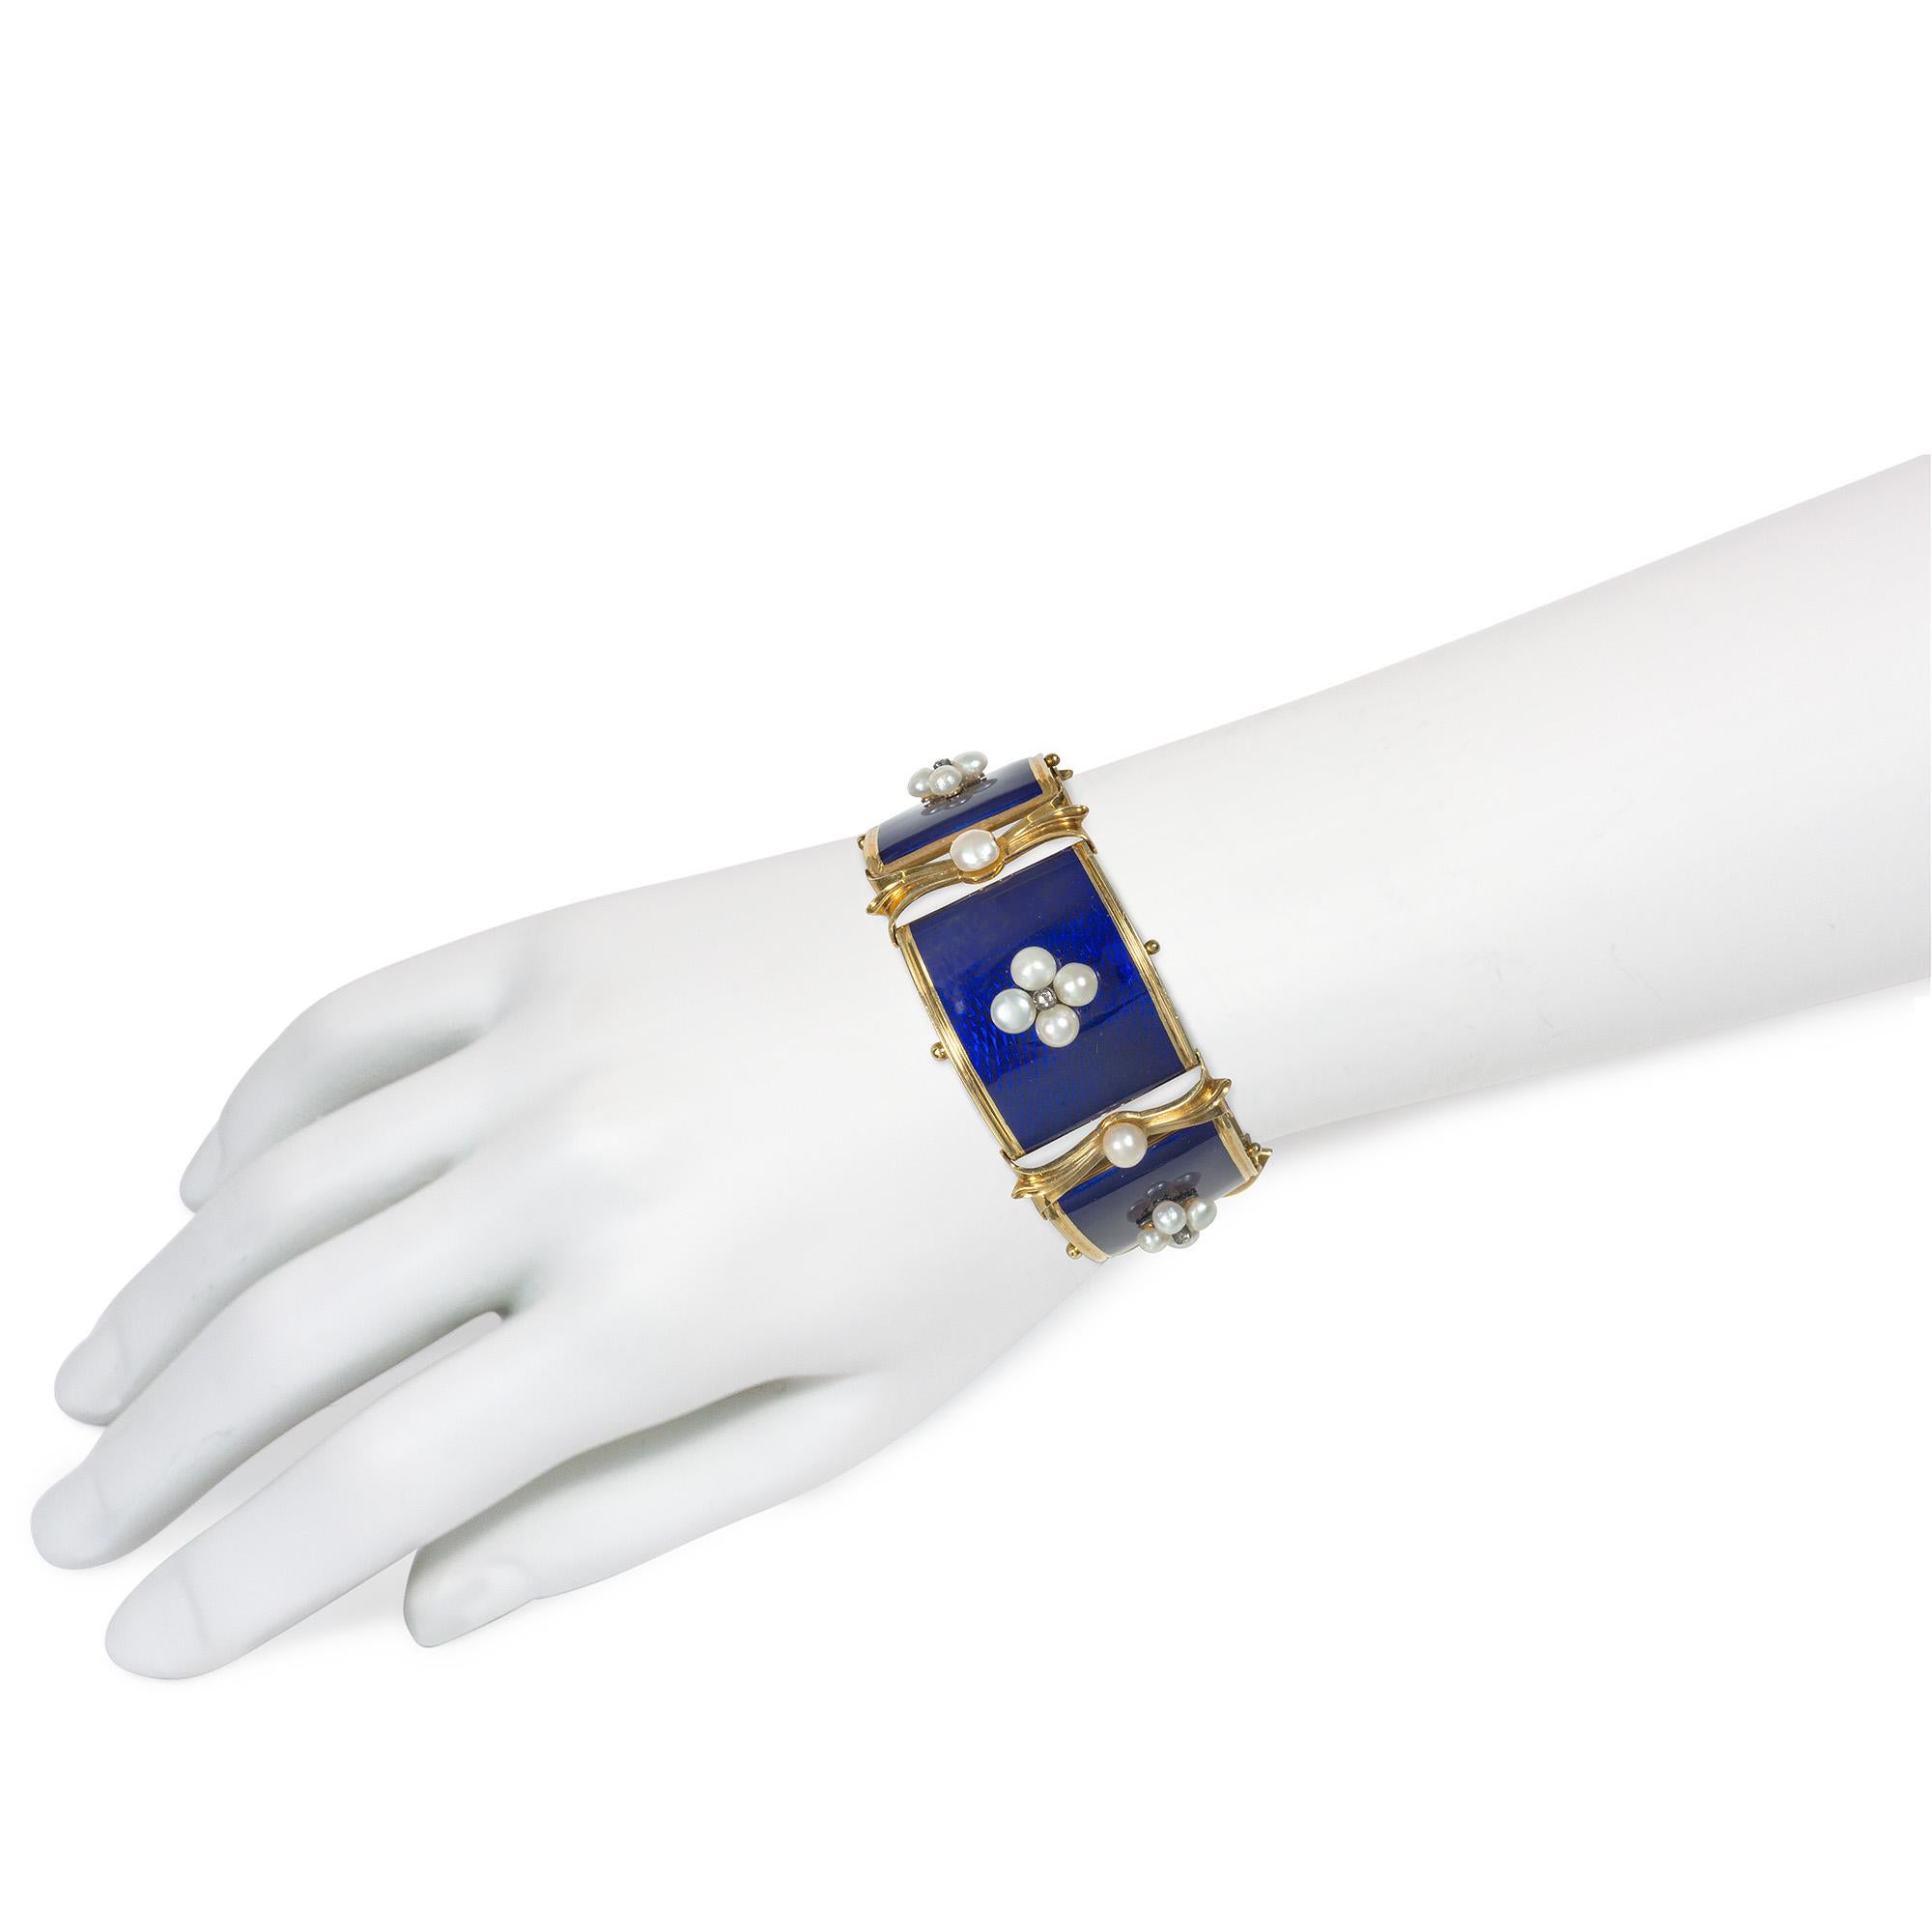 Antique Gold, Blue Enamel, and Pearl Bracelet in Original Froment-Meurice Box In Good Condition For Sale In New York, NY